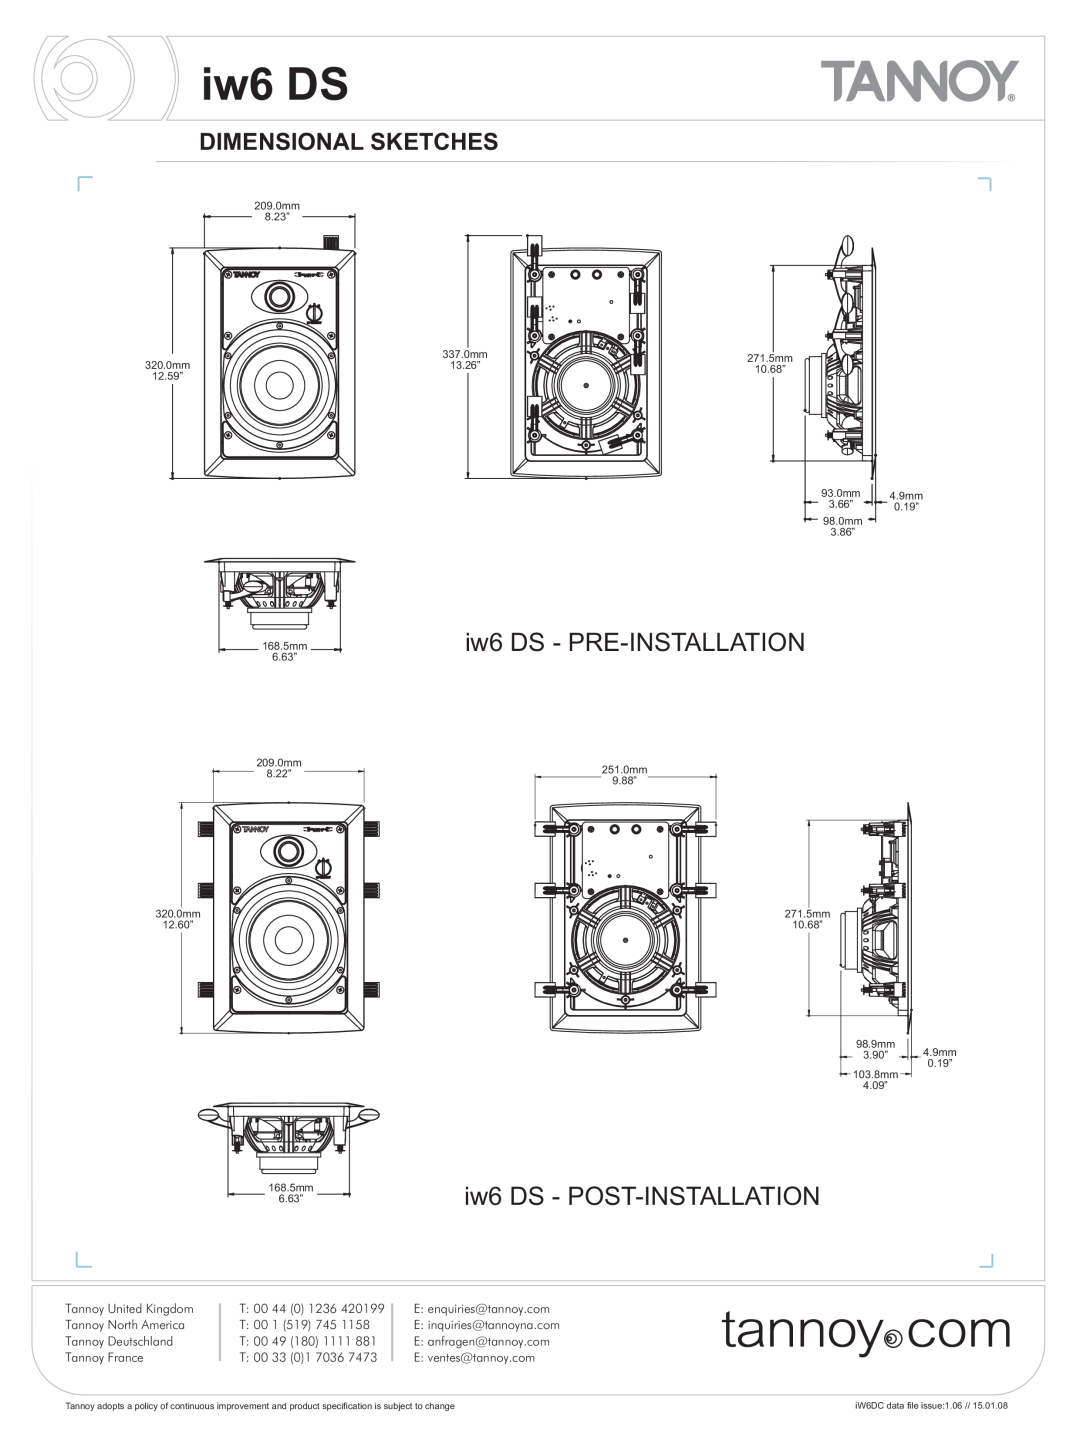 Tannoy warranty Dimensional Sketches, iw6 DS - PRE-INSTALLATION, iw6iw6DS DS- POST- POST-INSTALLATION-INSTALLATION 